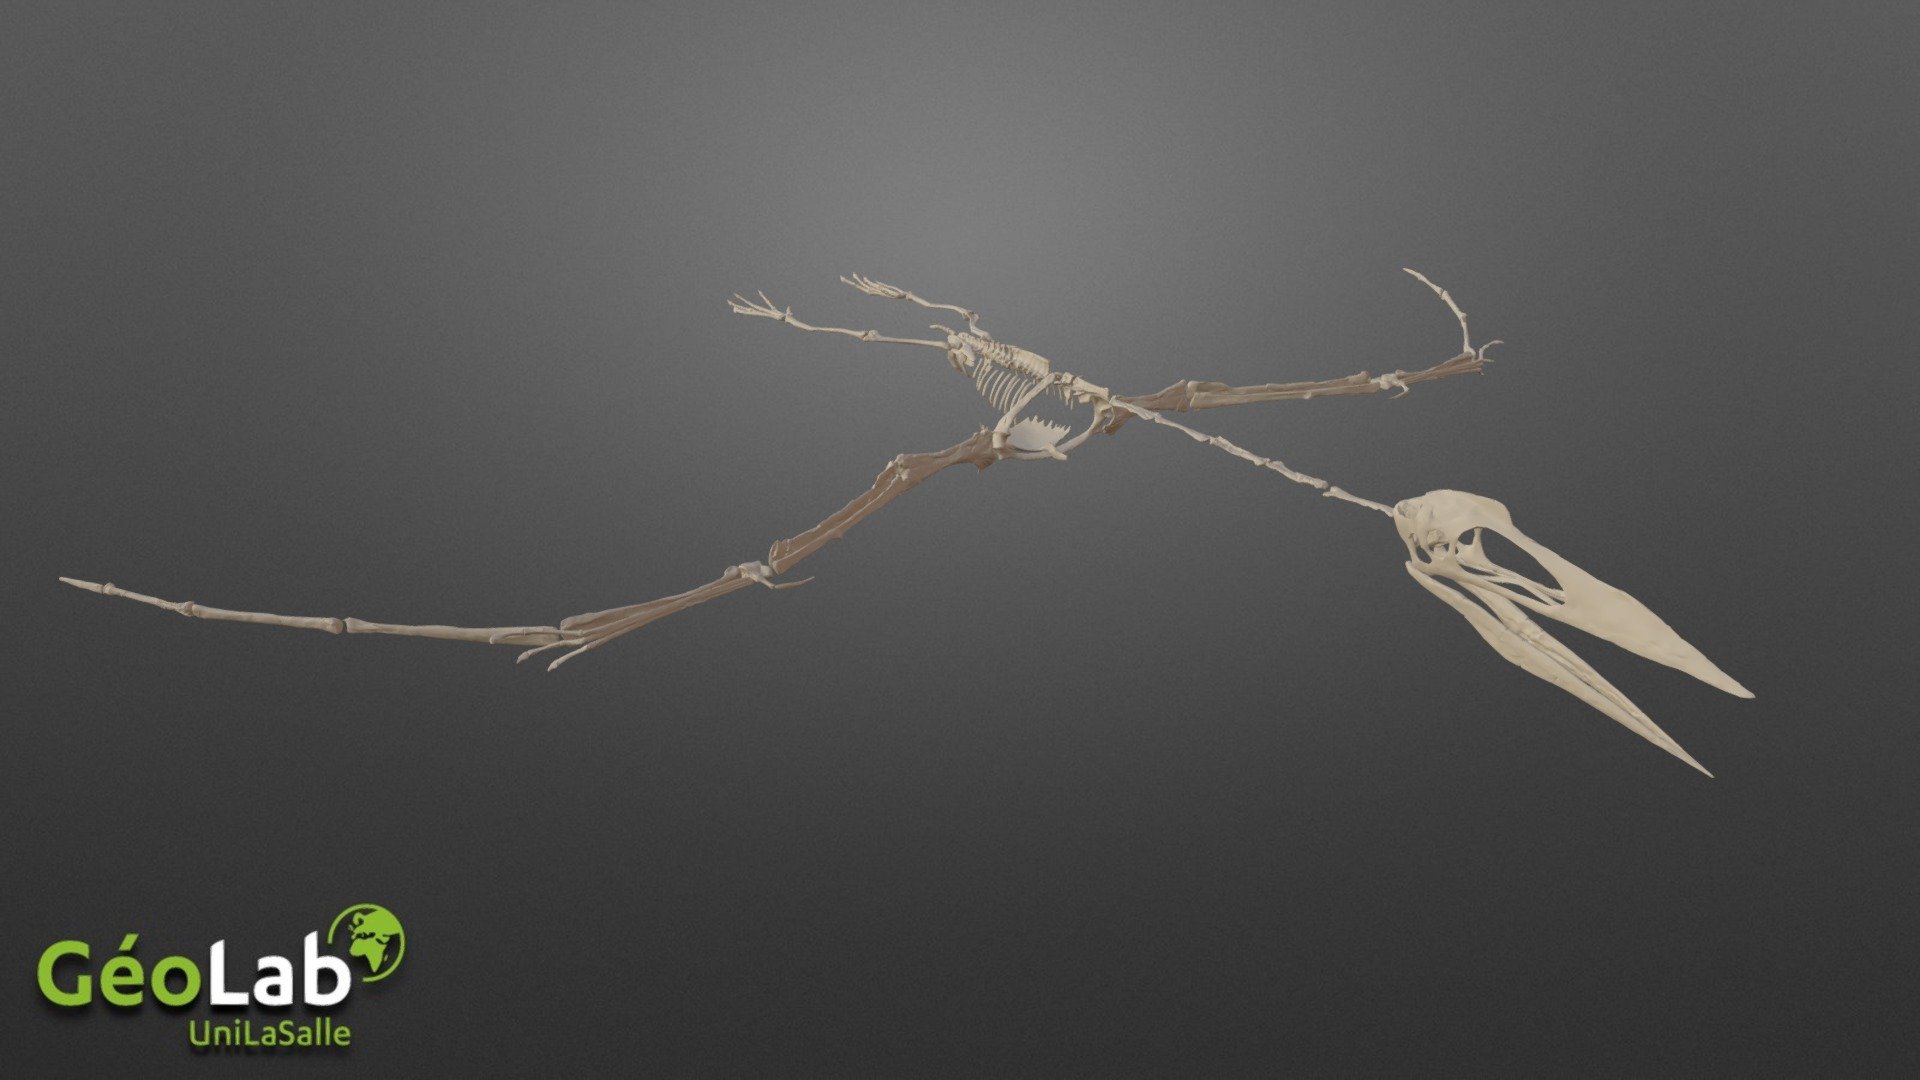 Phosphatodraco, Maastrichien, discovered in a quarry of phosphates of Morocco then sent to the United States for molding.
Flying reptile of 2m long, one of the last pterosaurs before the great extinction.
Molded skeleton scanned in paleolab (Morocco) and assembled on Blender.

https://www.musee-delapparent.com/
https://www.youtube.com/c/GéoLabUniLaSalle
https://www.linkedin.com/showcase/geolabunilasalle/ - Pterosaure - Download Free 3D model by GéoLab UniLaSalle (@geolab.unilasalle) 3d model